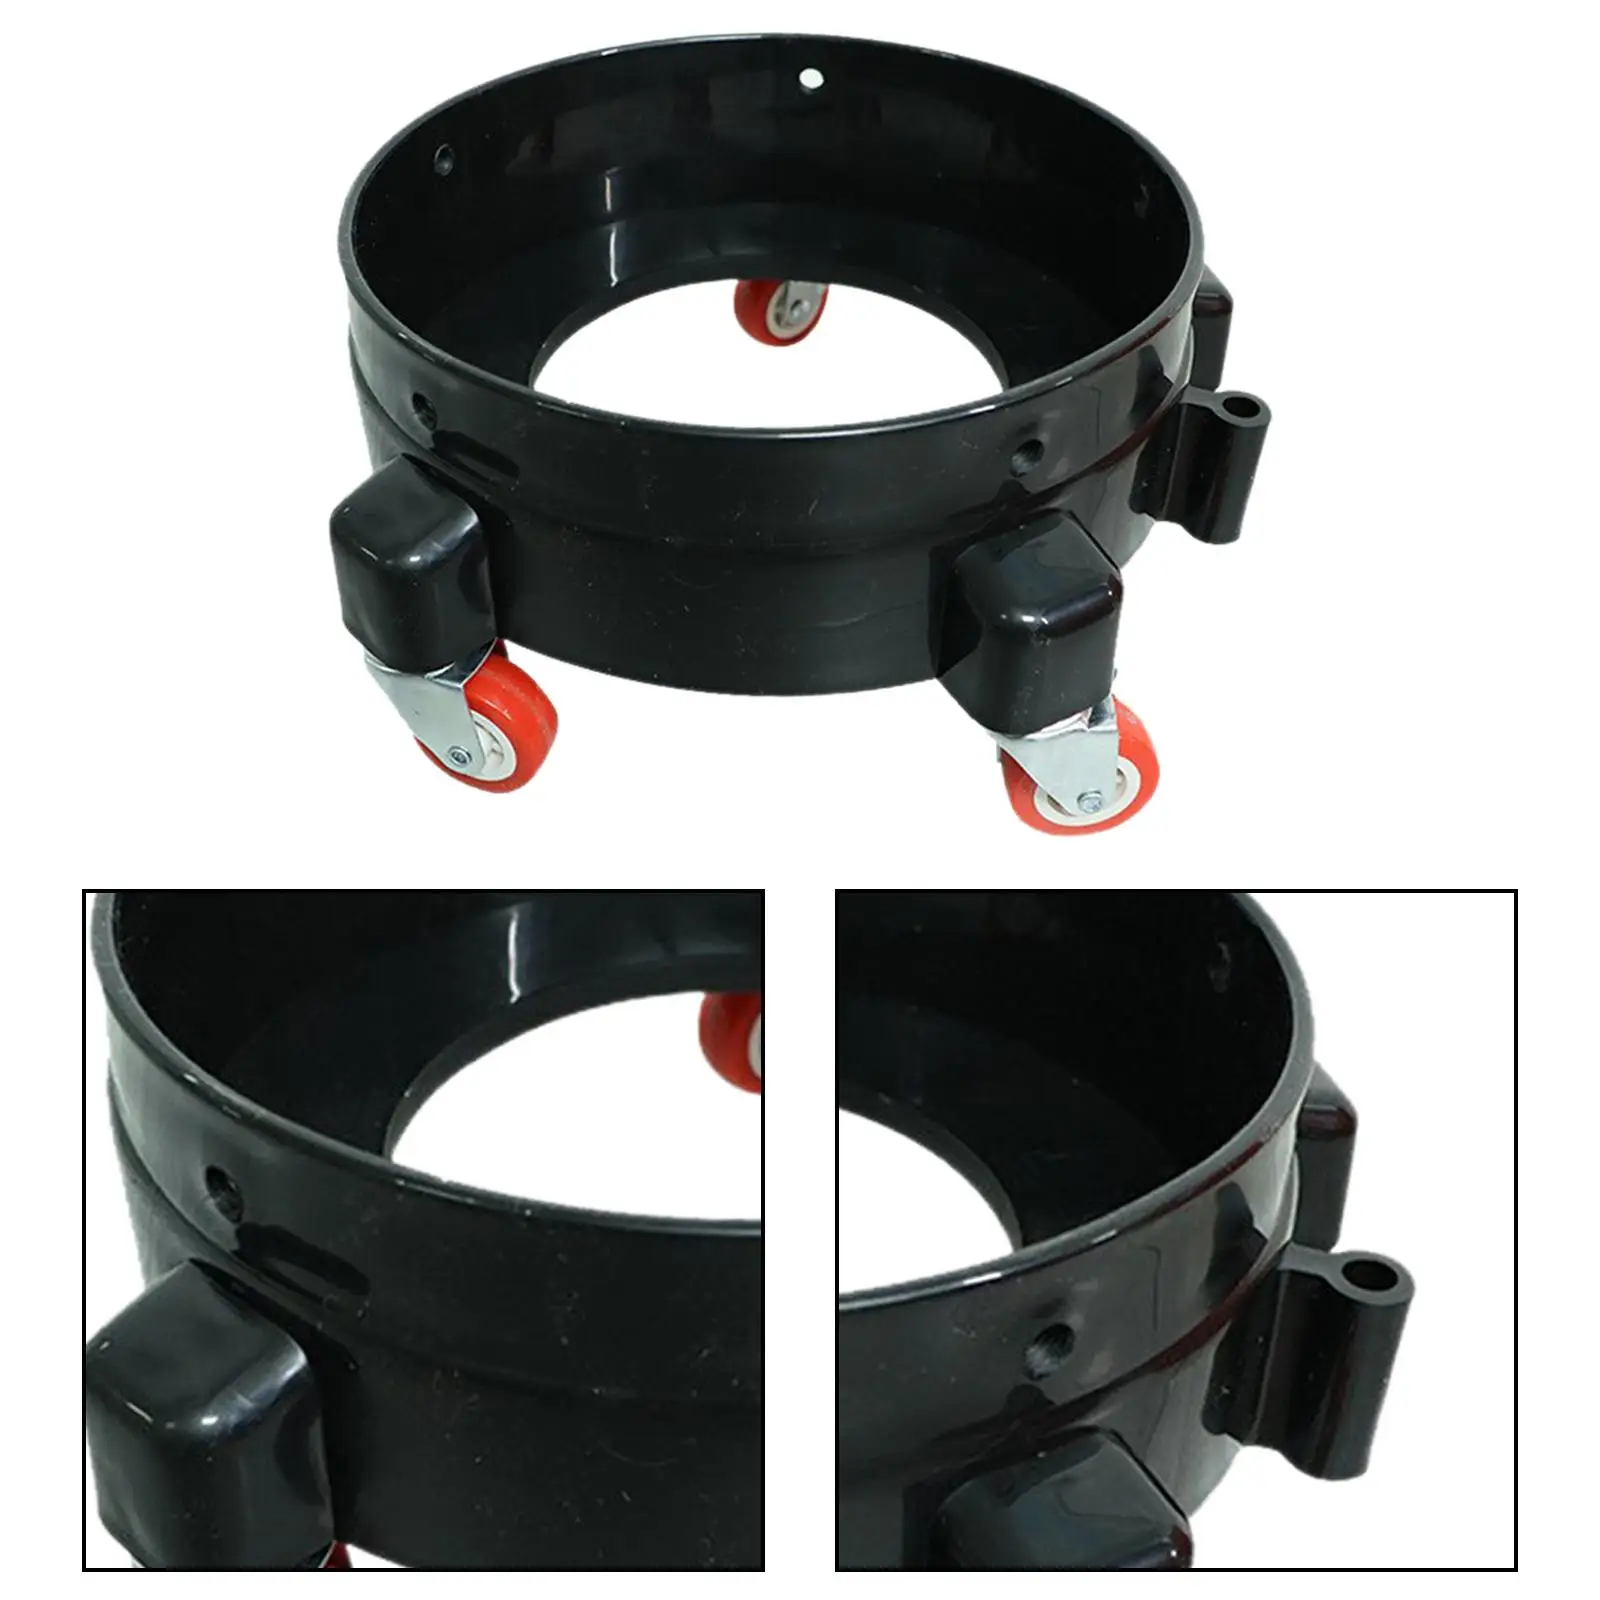 

Swivel Casters Multifunctional Car Wash Rolling Bucket Dolly for Detailing Painting Cleaner Trucks Construction Workers Waxing